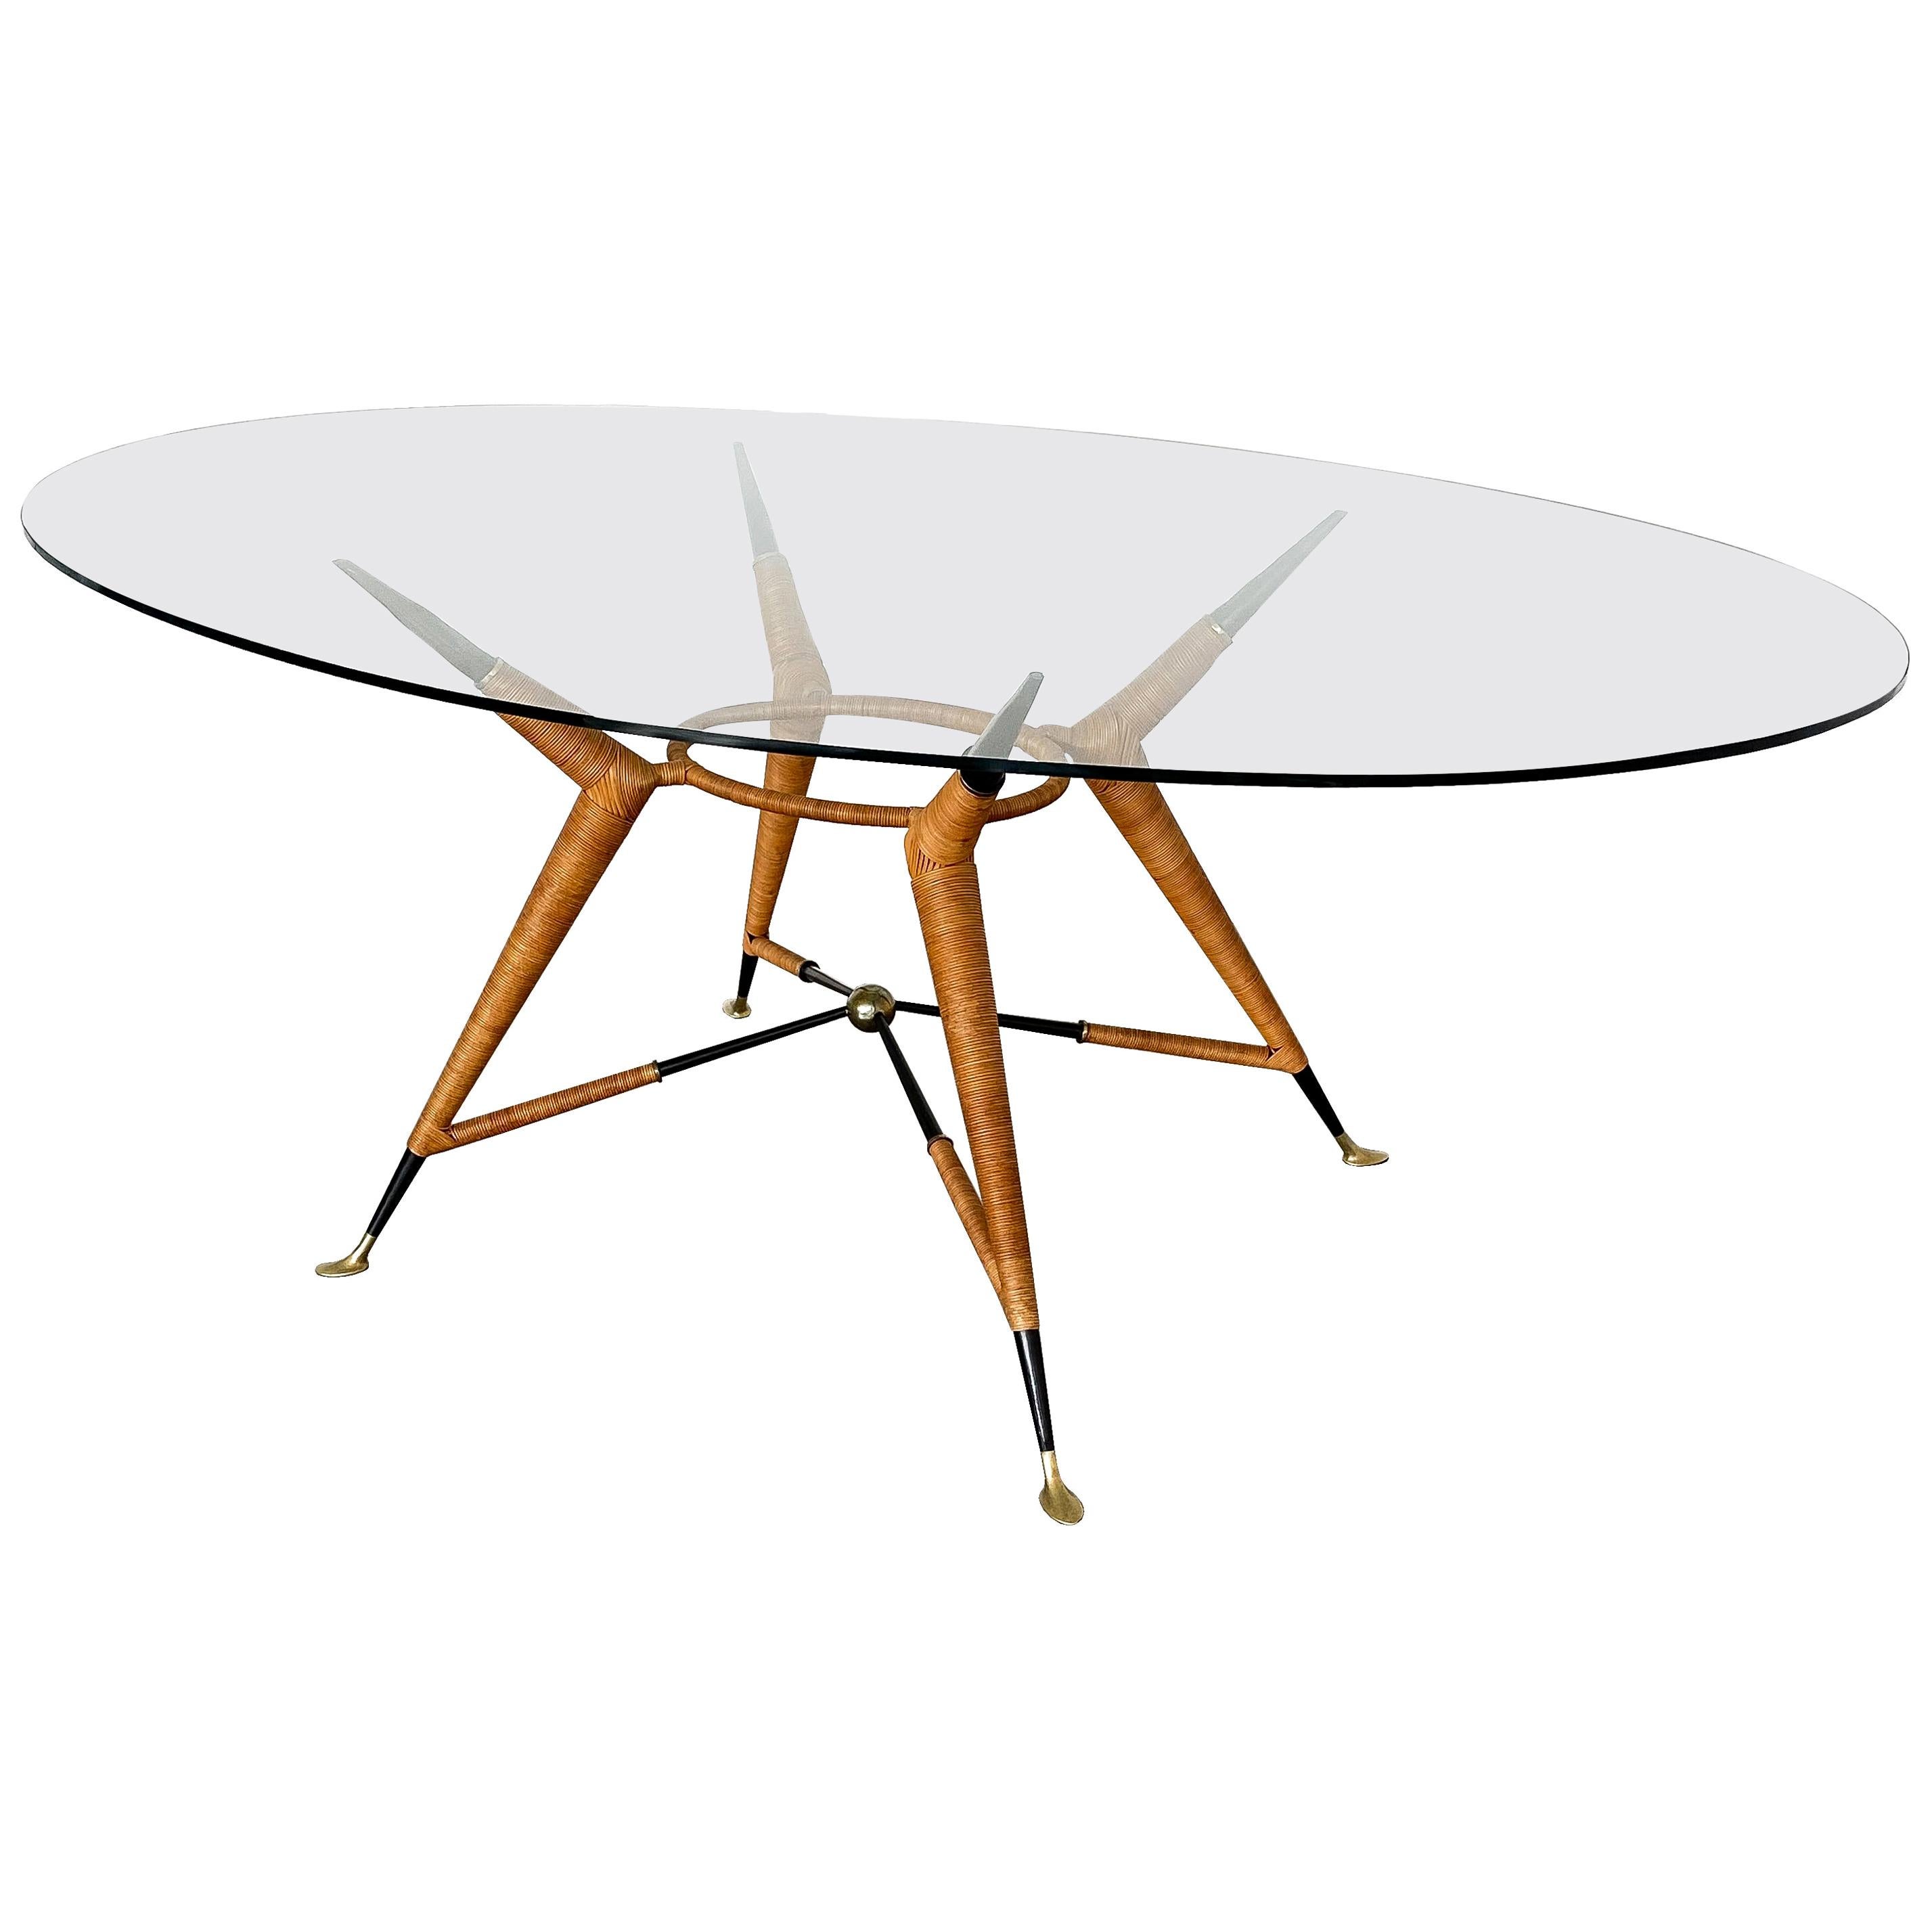 Mexican Modernist Dining Table with Oval Glass Top